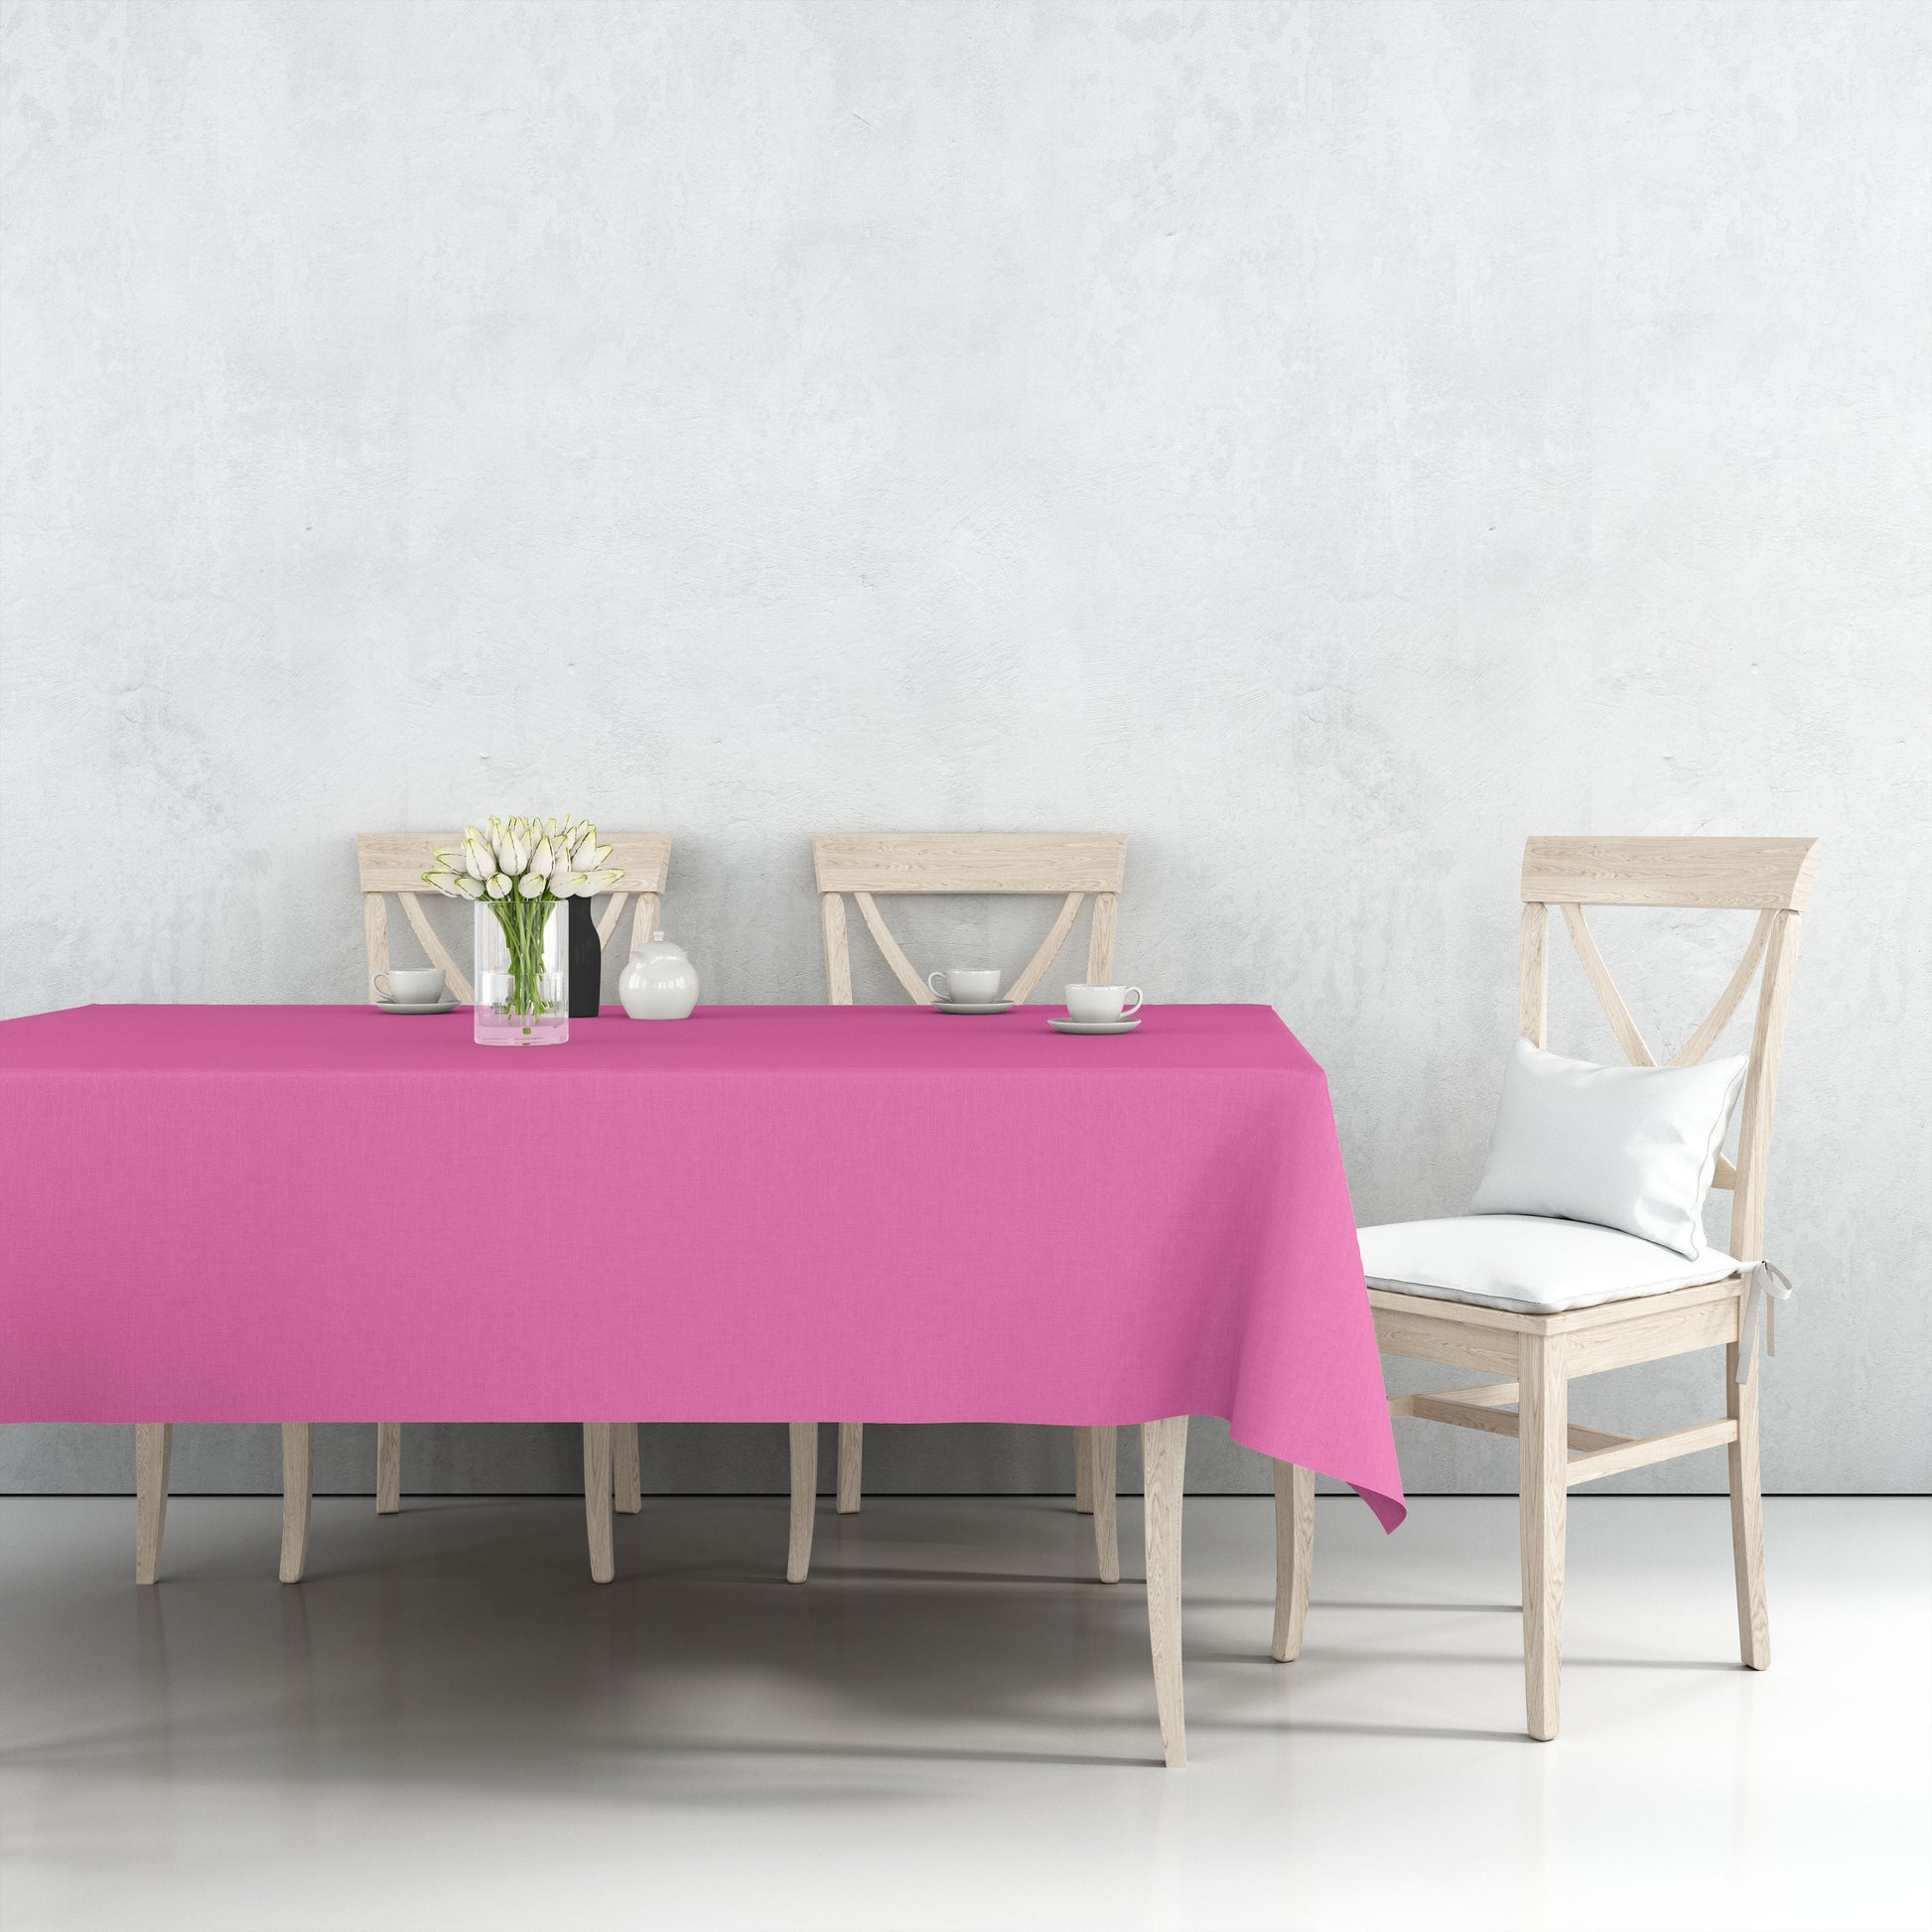 Tablecover Plastic Hot Pink Rectangular  54'' X 108'' Tablesettings Party Dimensions   